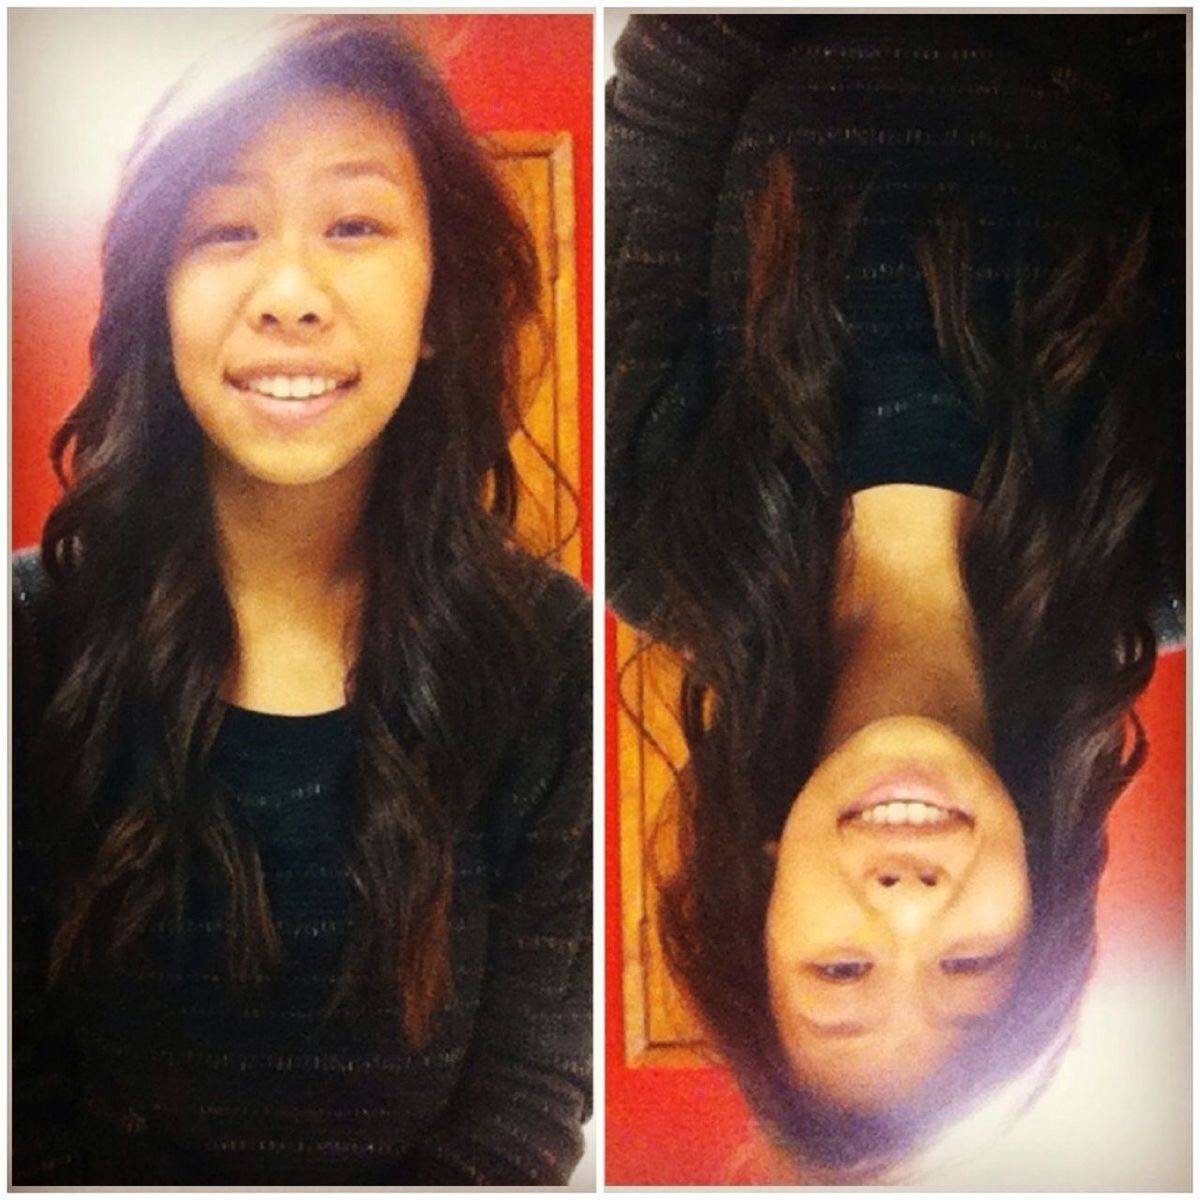 Succesfully curled my hair that on time (x